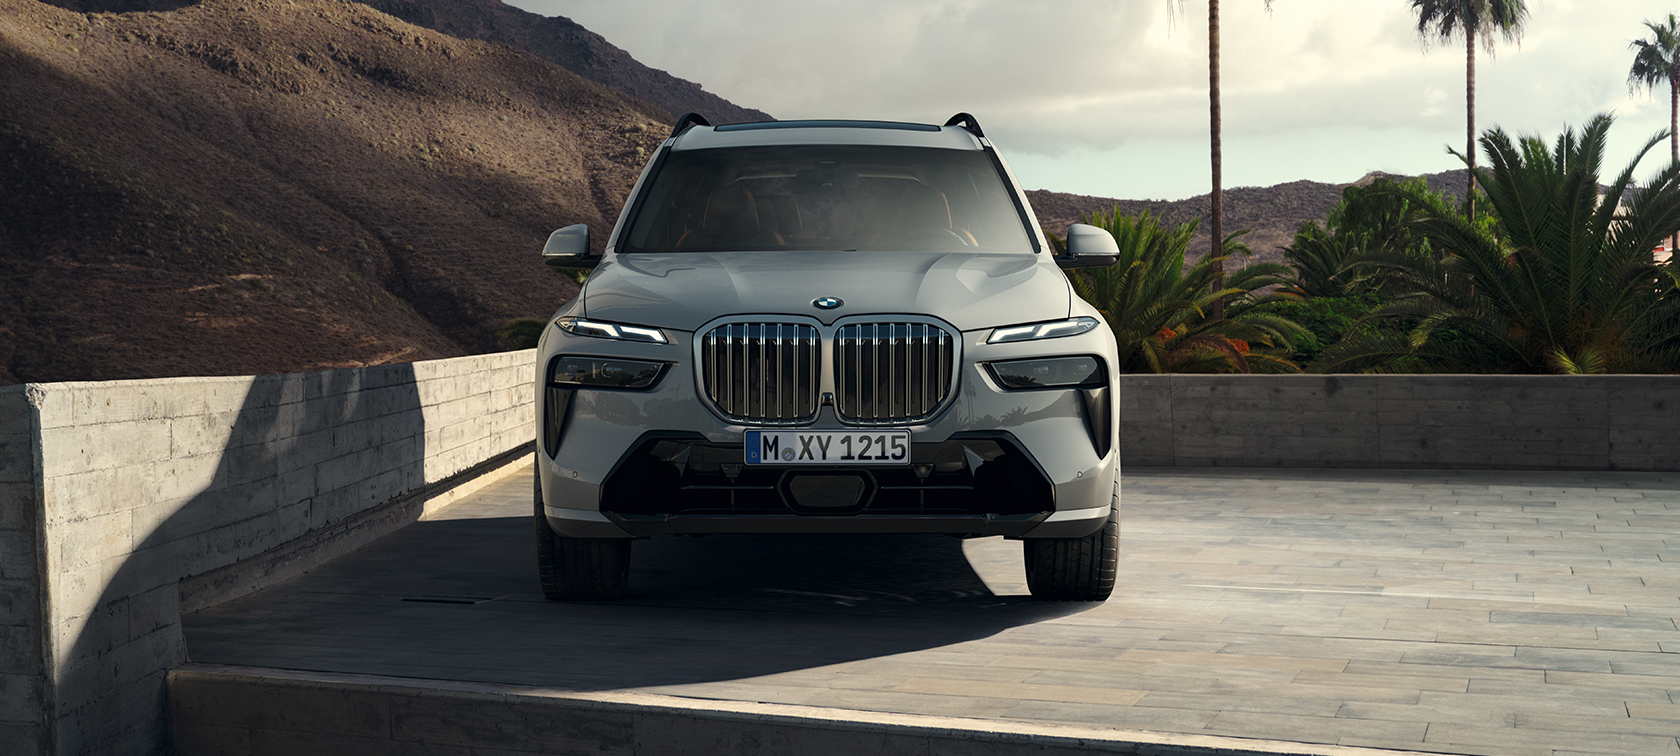 THE NEW BMW X7